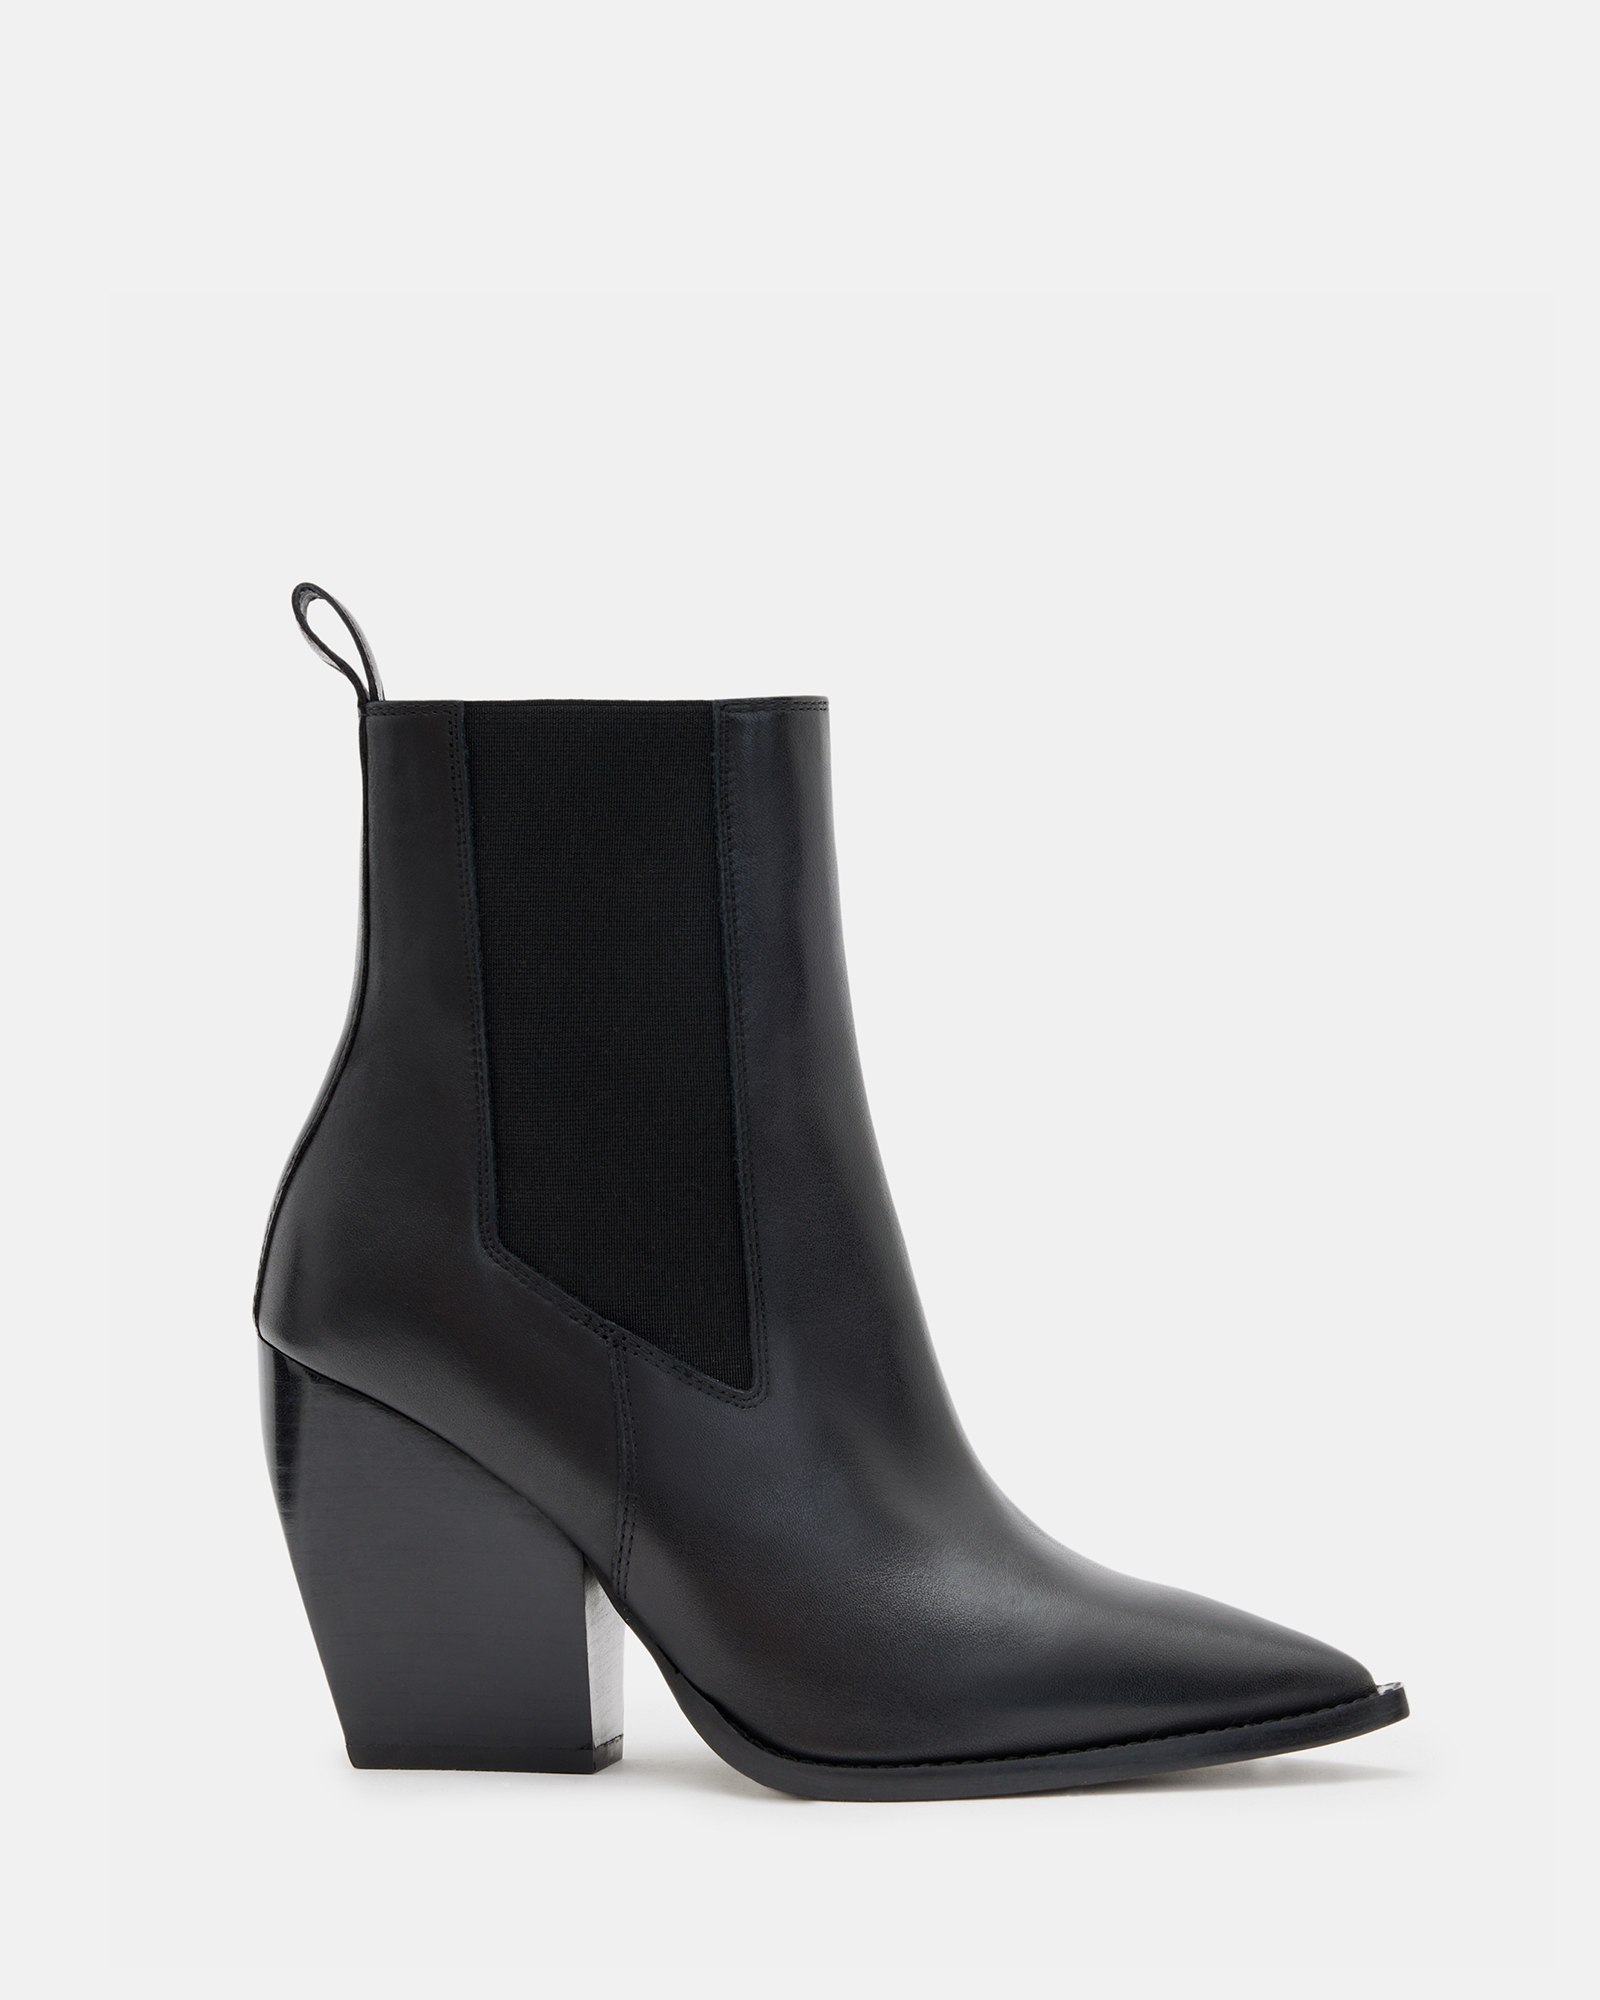 AllSaints Ria Pointed Toe Leather Boots